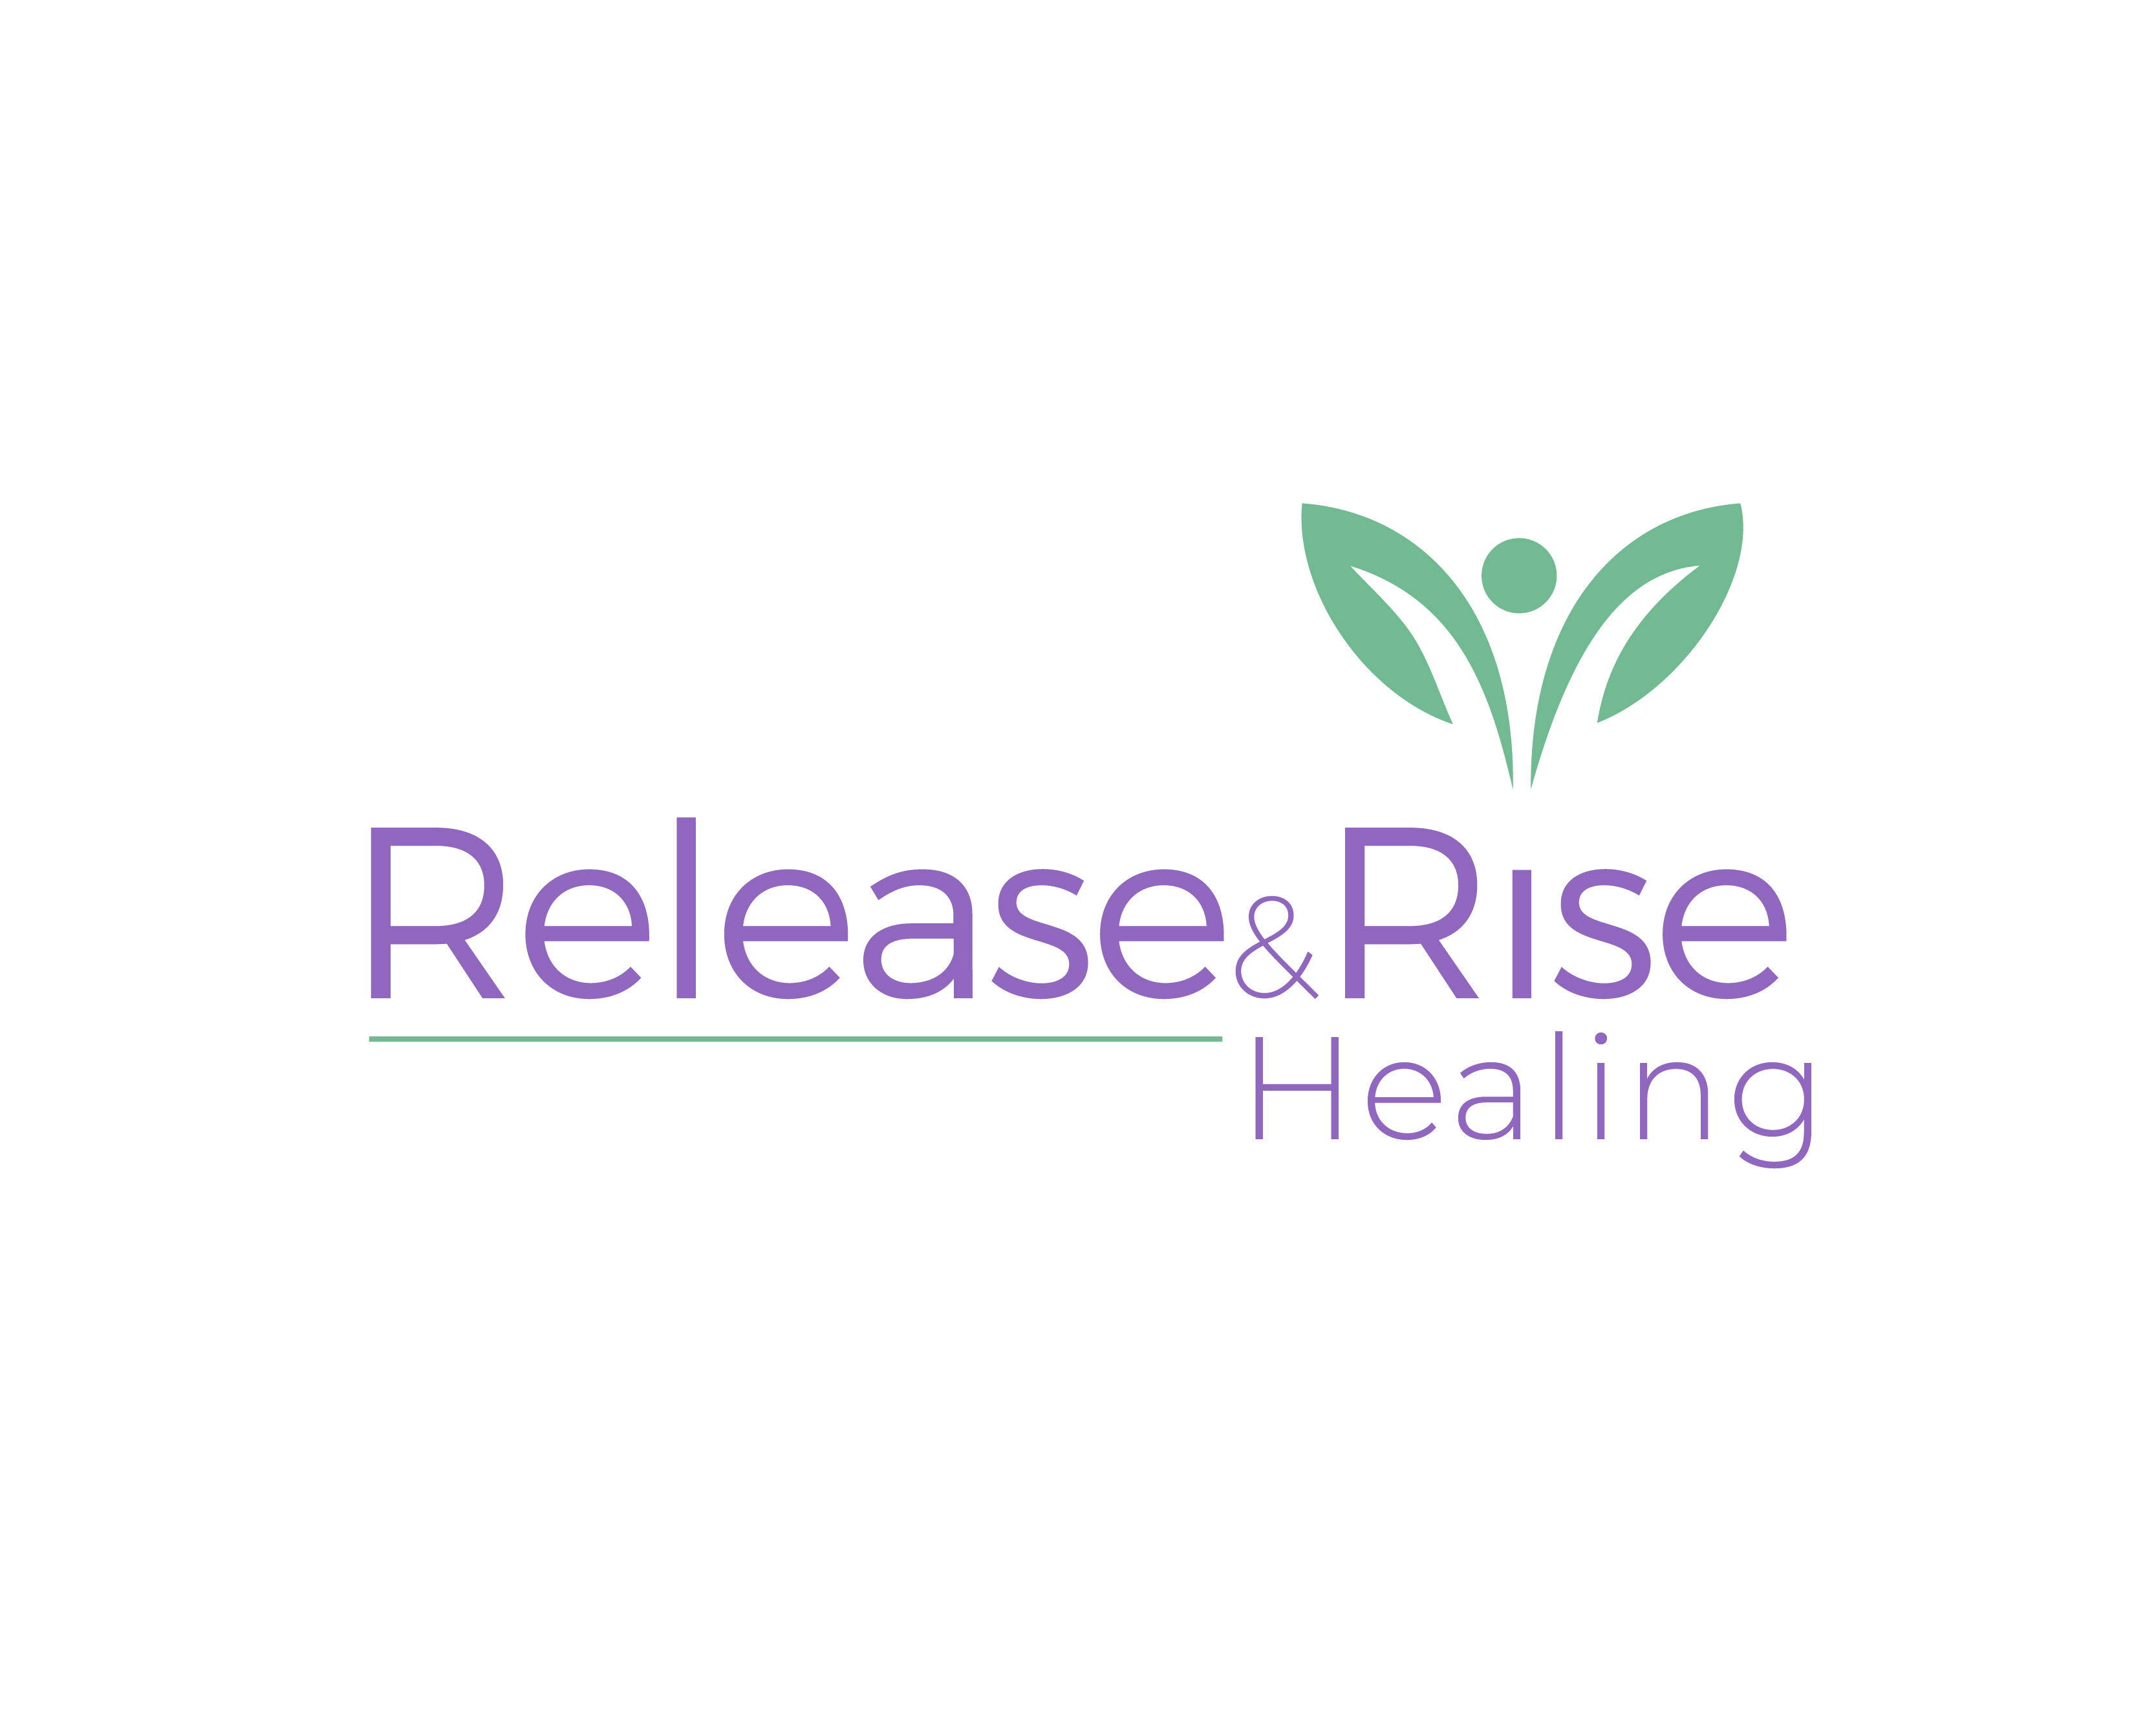 Logo Design Contest for Release and Rise Healing | Hatchwise